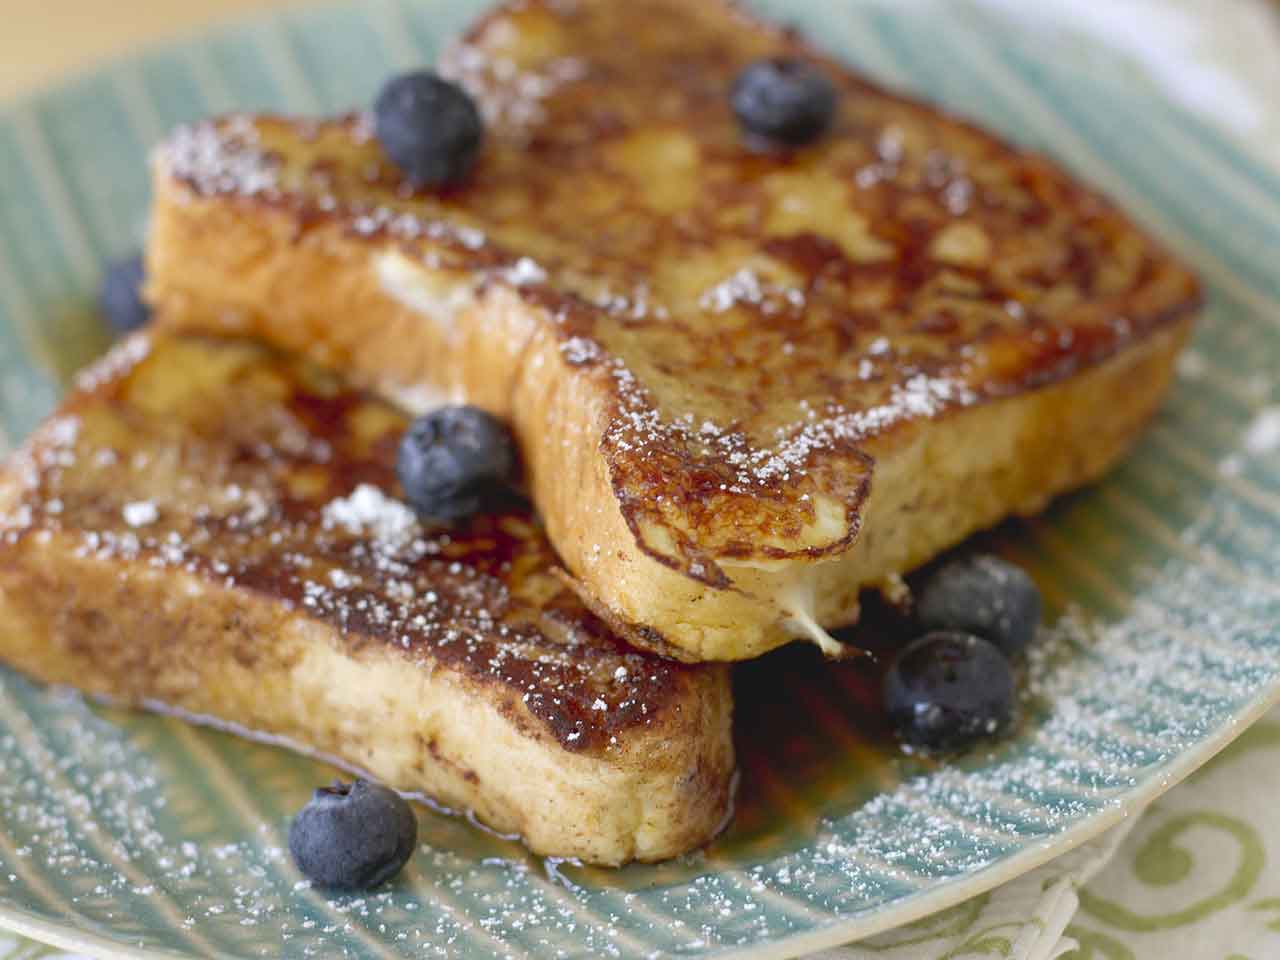 Two slices of French toast